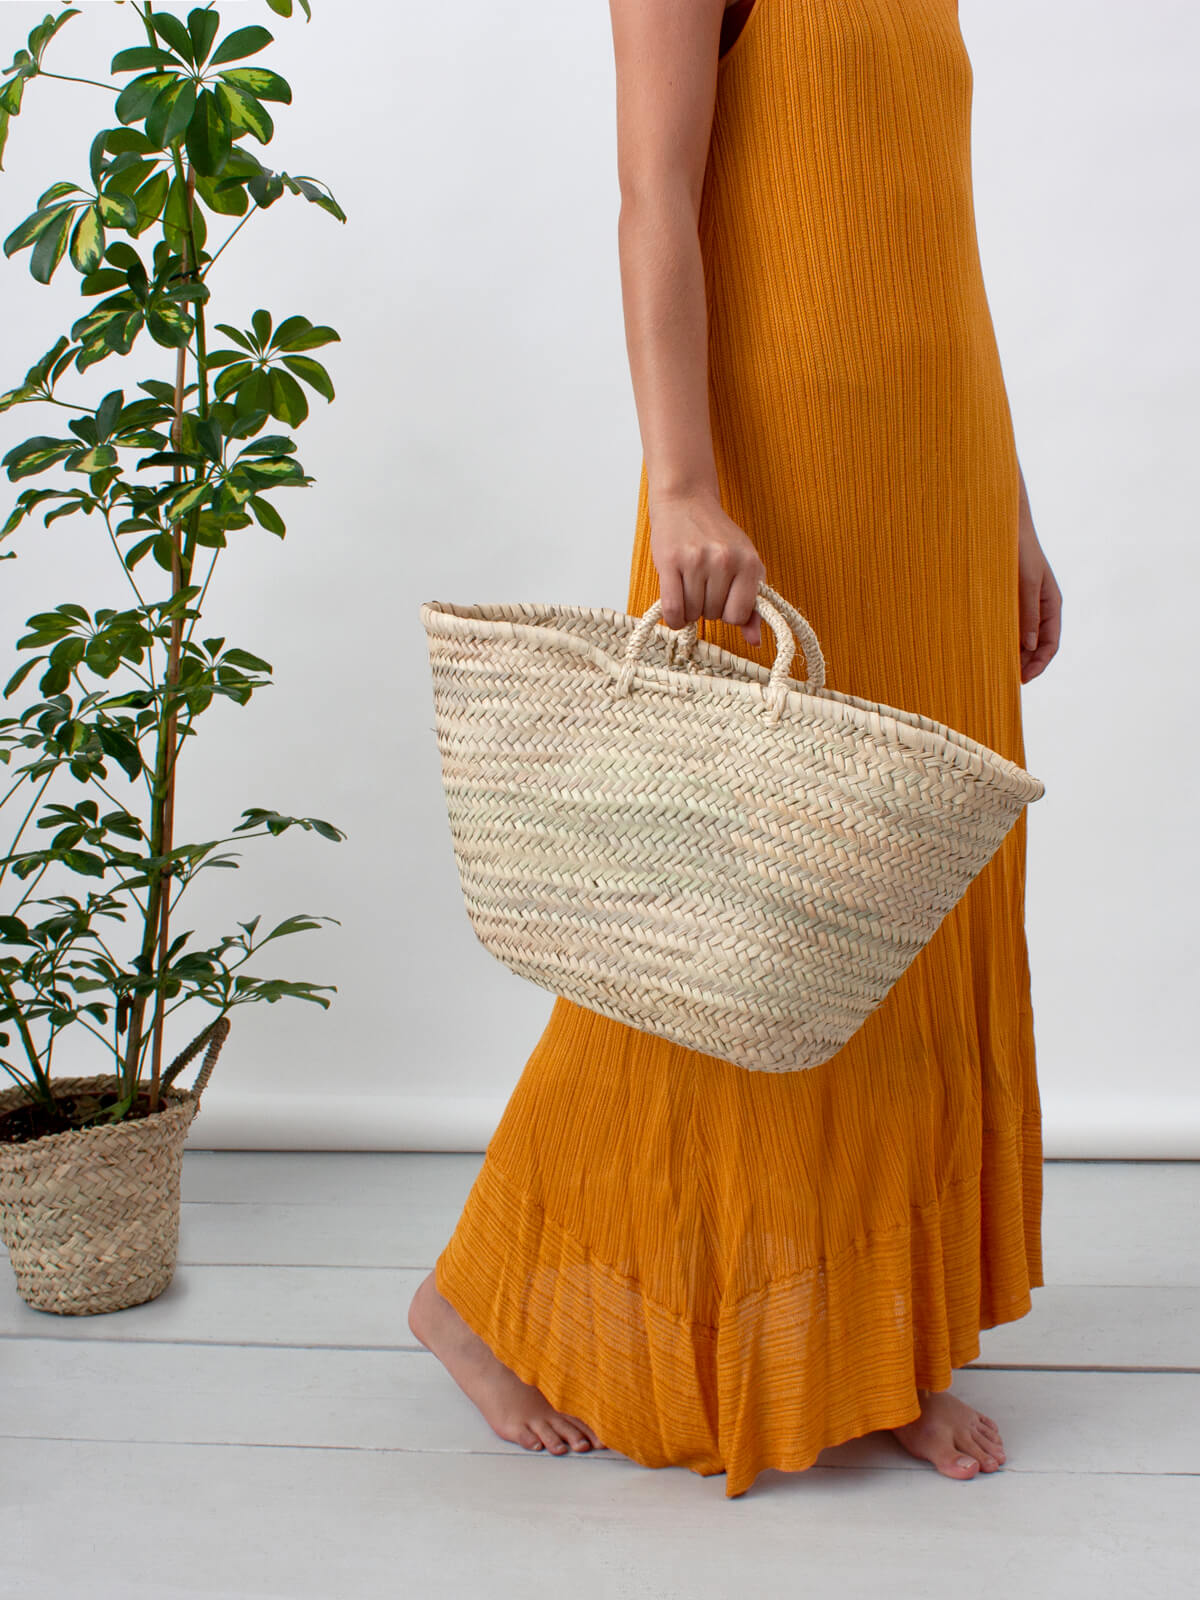 Shop Dragon Diffusion Straw Bags by palms